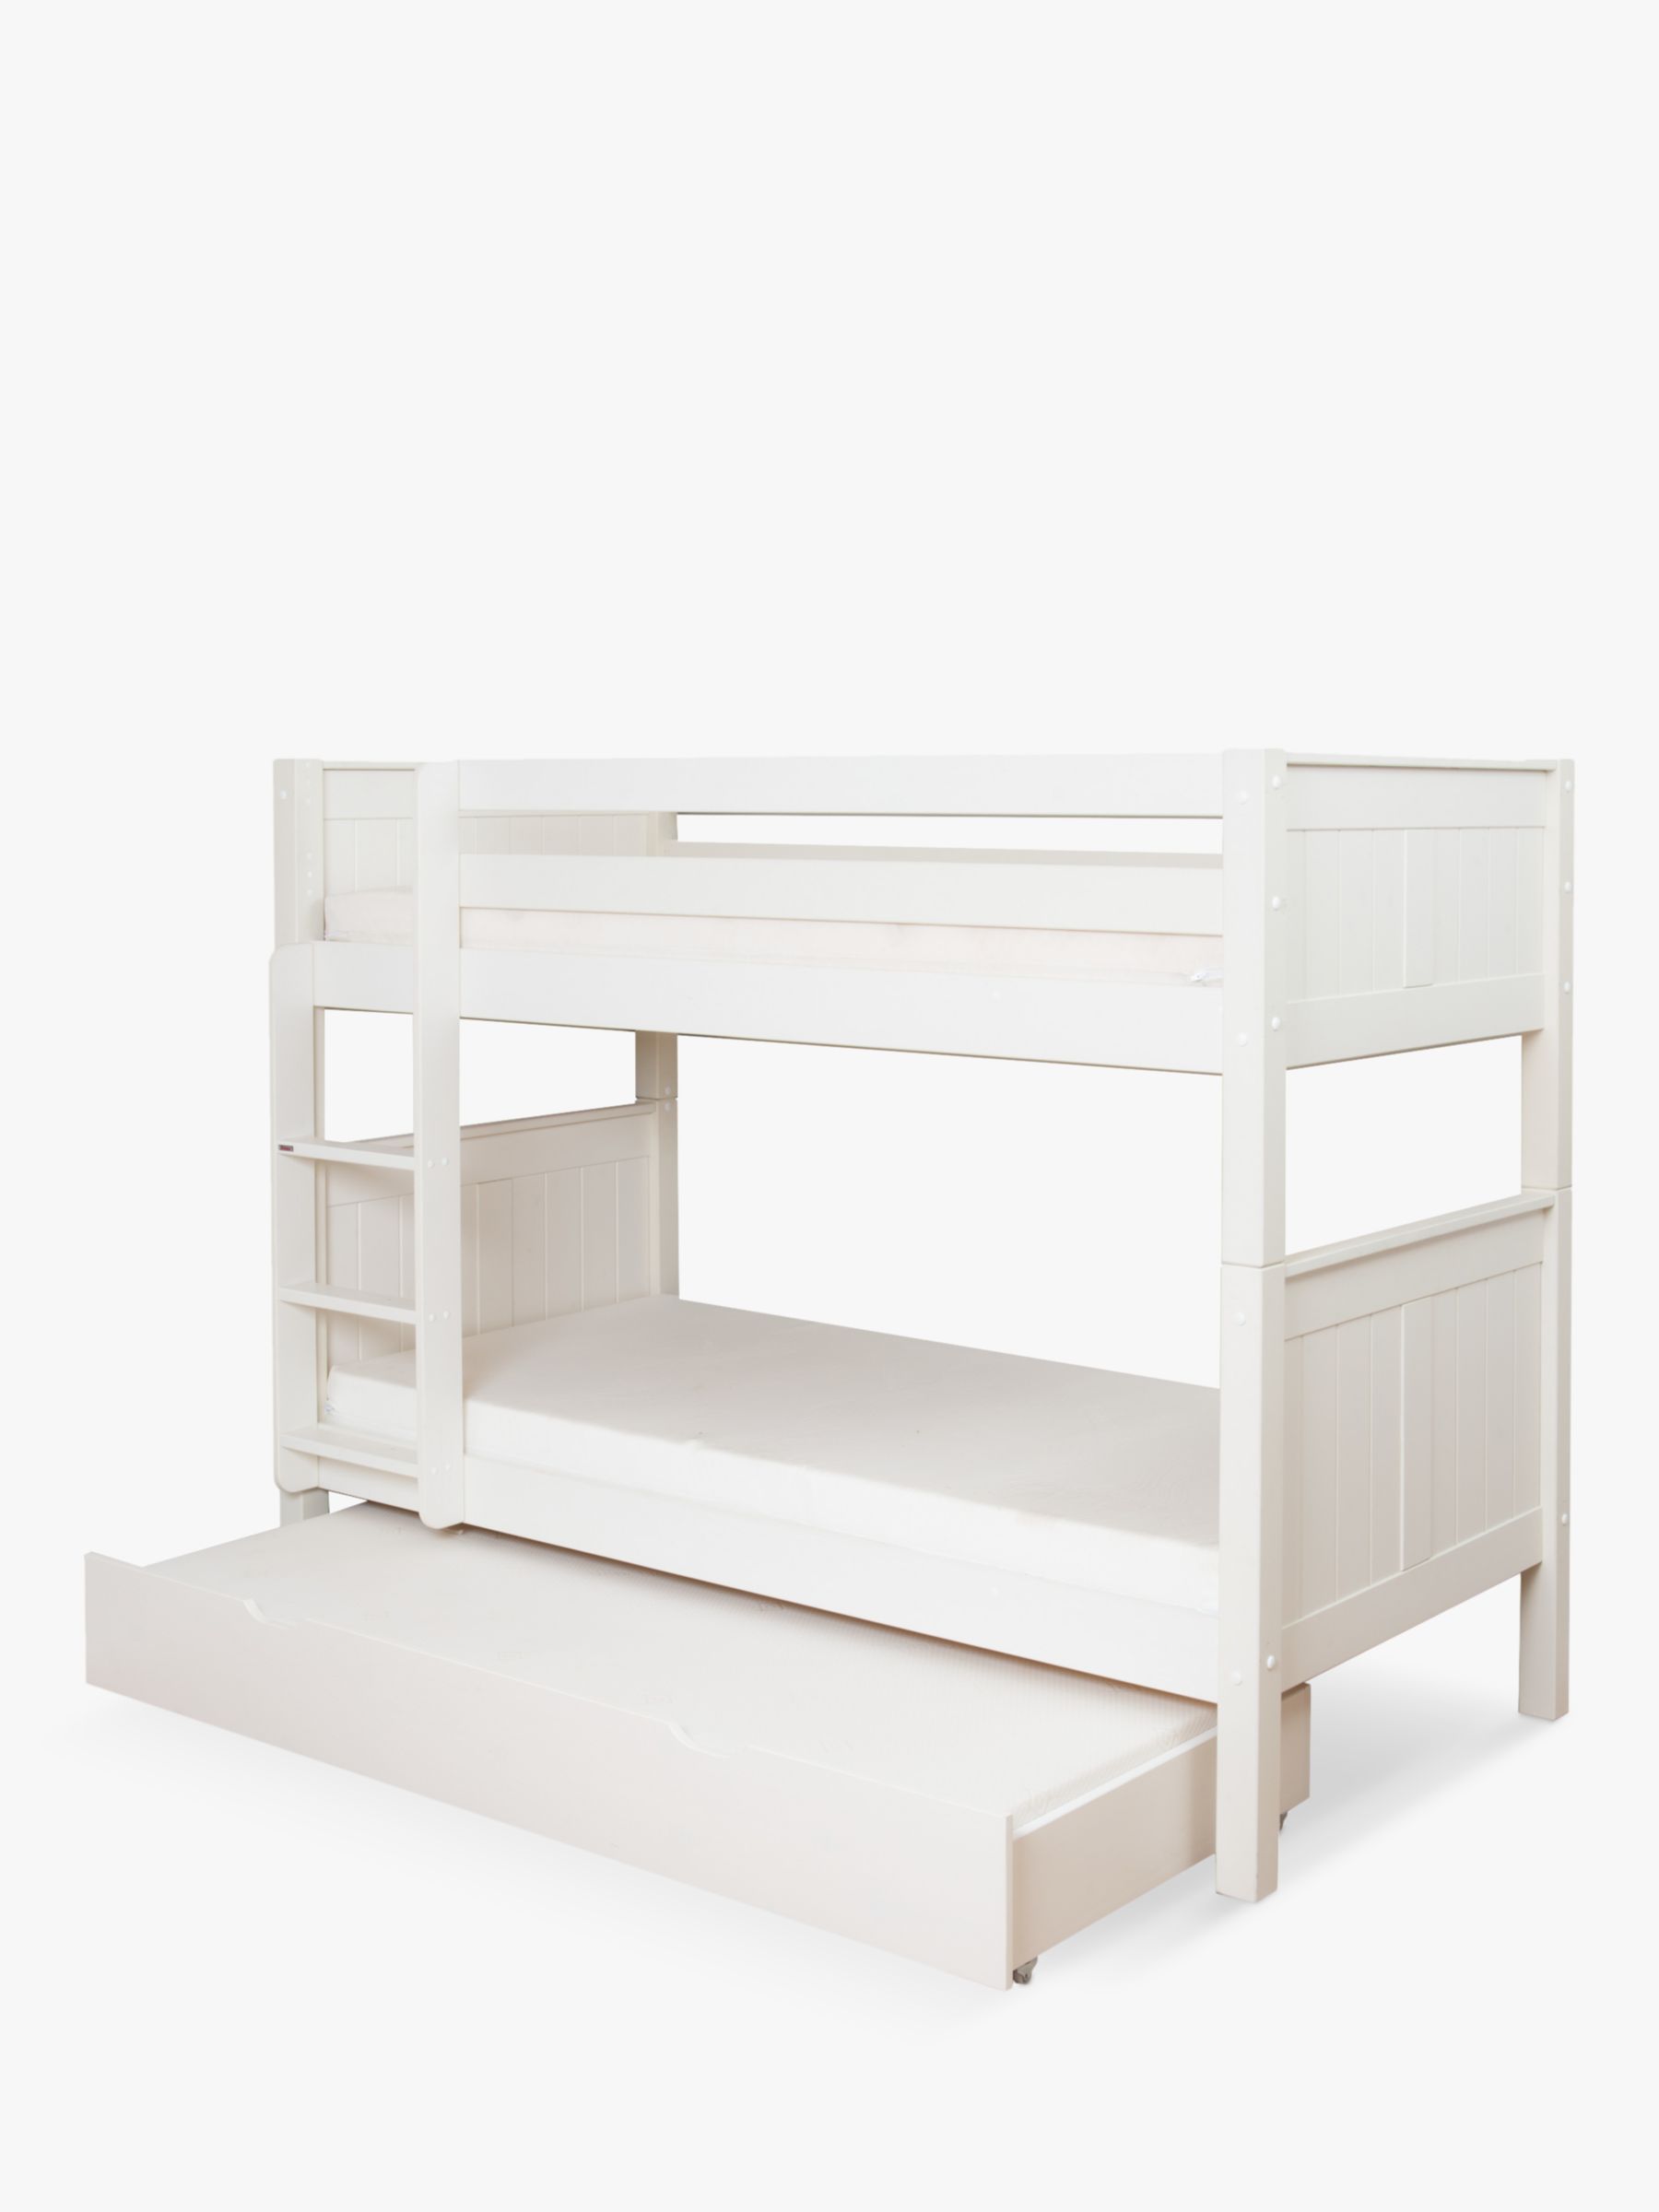 Stompa Classic Child Compliant Bunk Bed, Bunk Bed Size Mattress